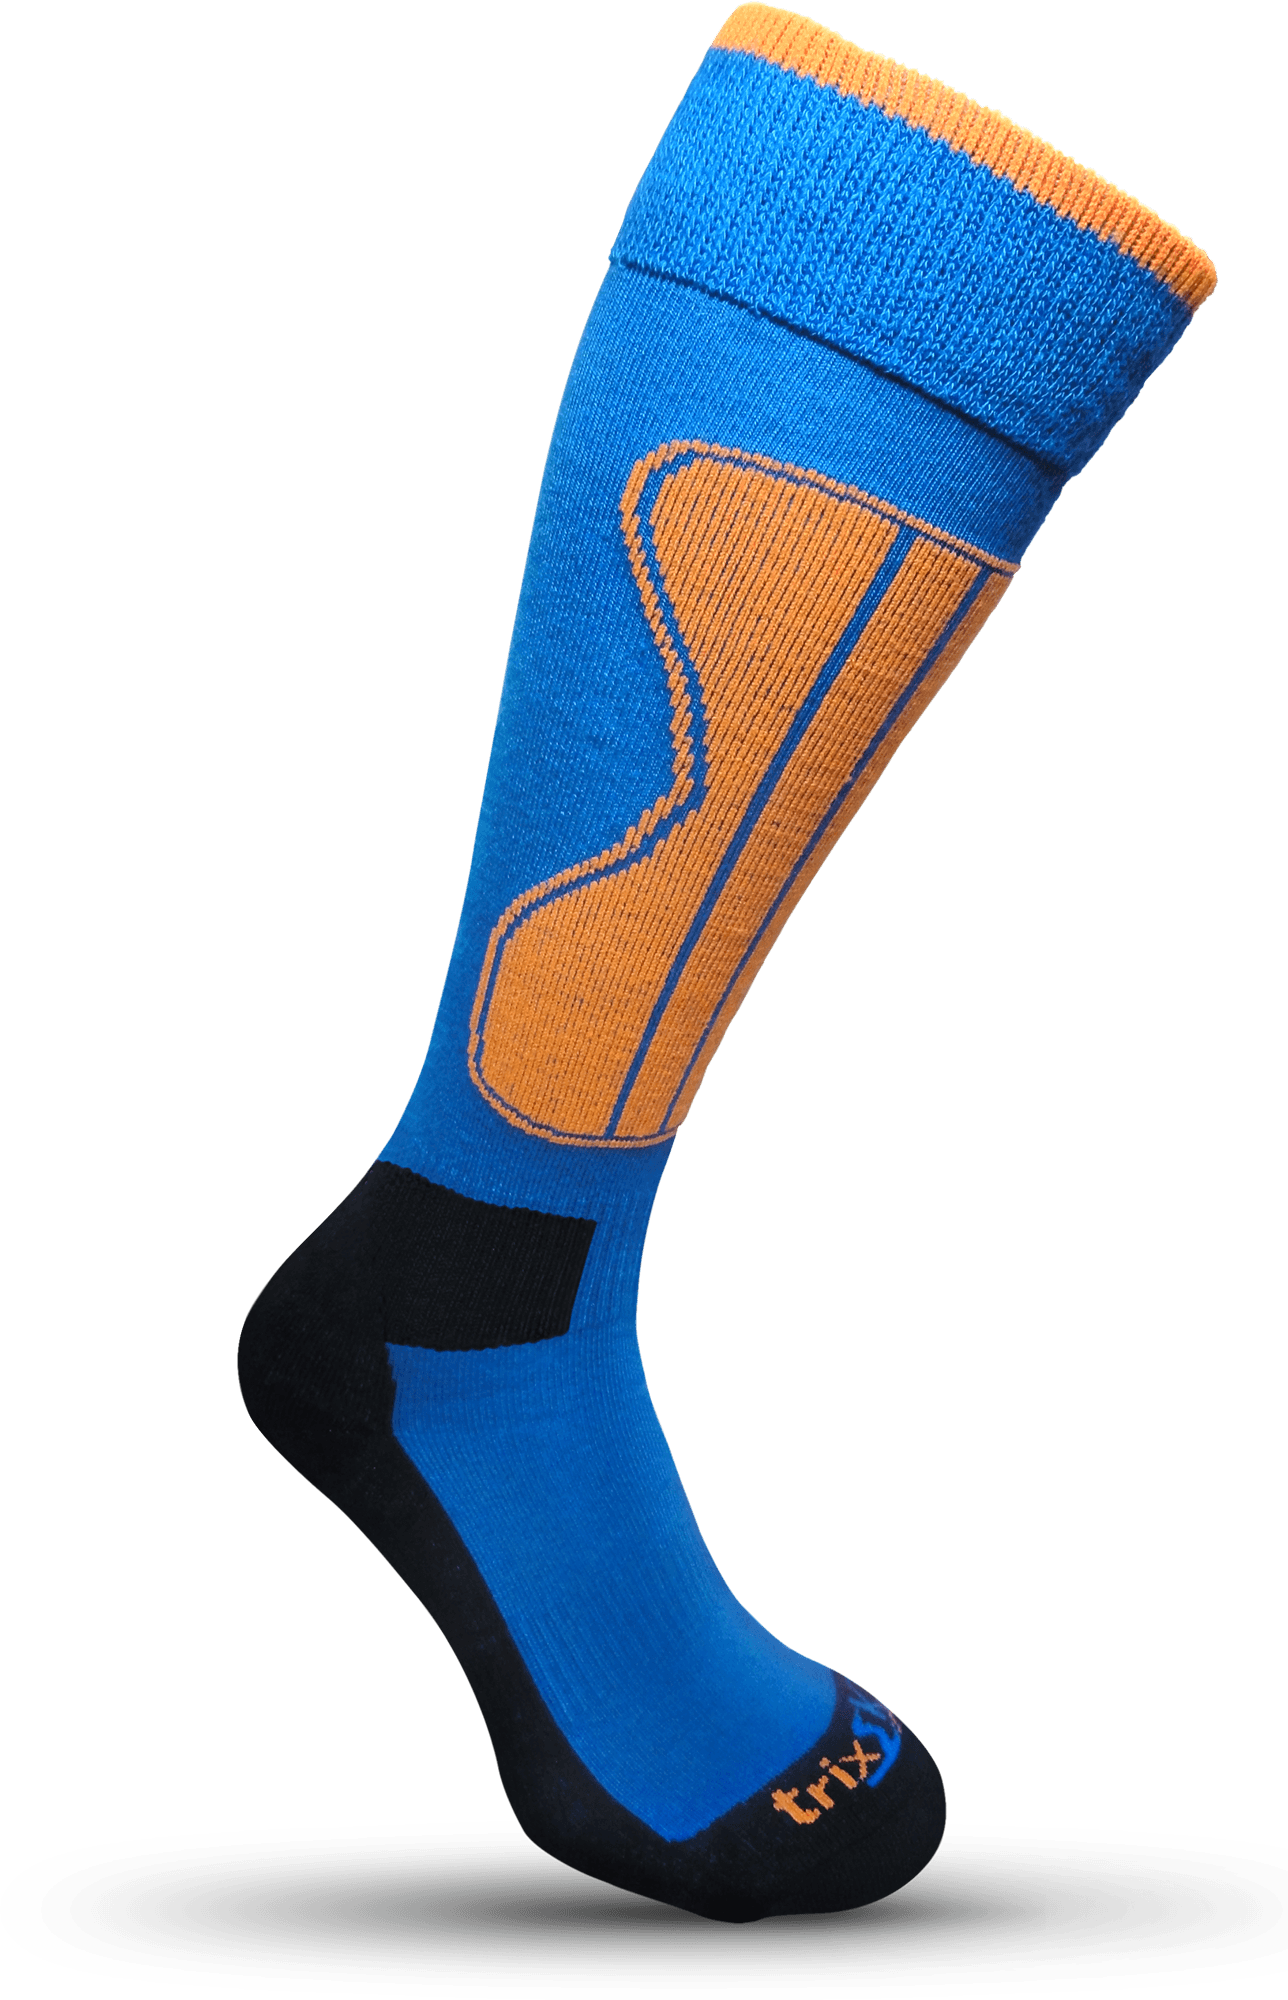 Side view of trixski merino blend Ski Socks  showing blue sock body with contrasting orange and black reinforced areas.  Socks have the trixski logo in orange and black knitted across the toe.